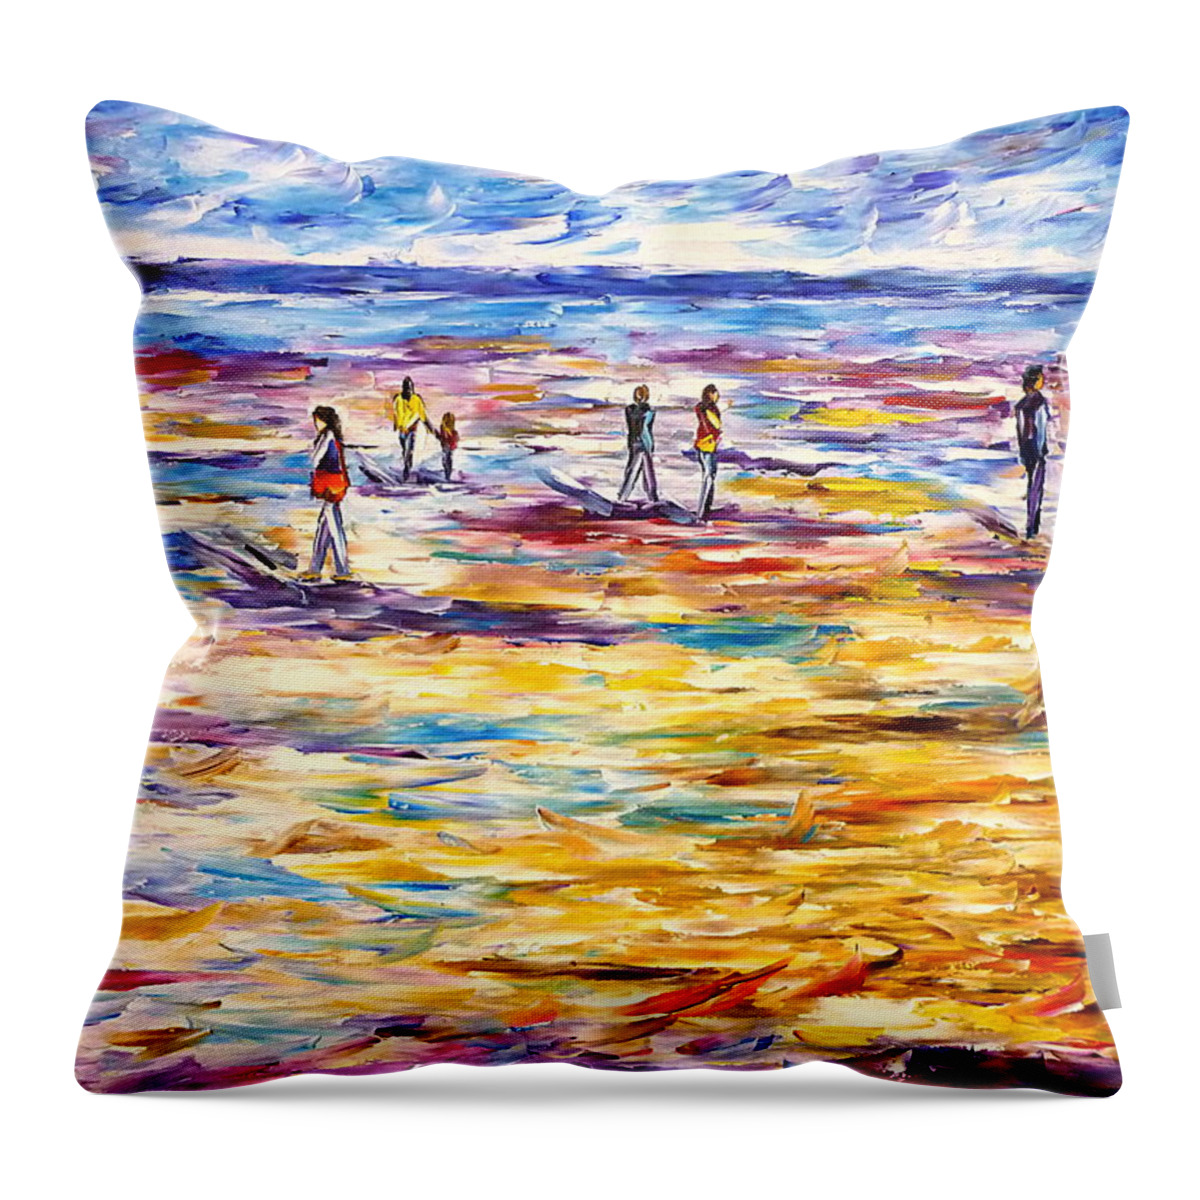 Beach Abstract Throw Pillow featuring the painting People On The Beach by Mirek Kuzniar